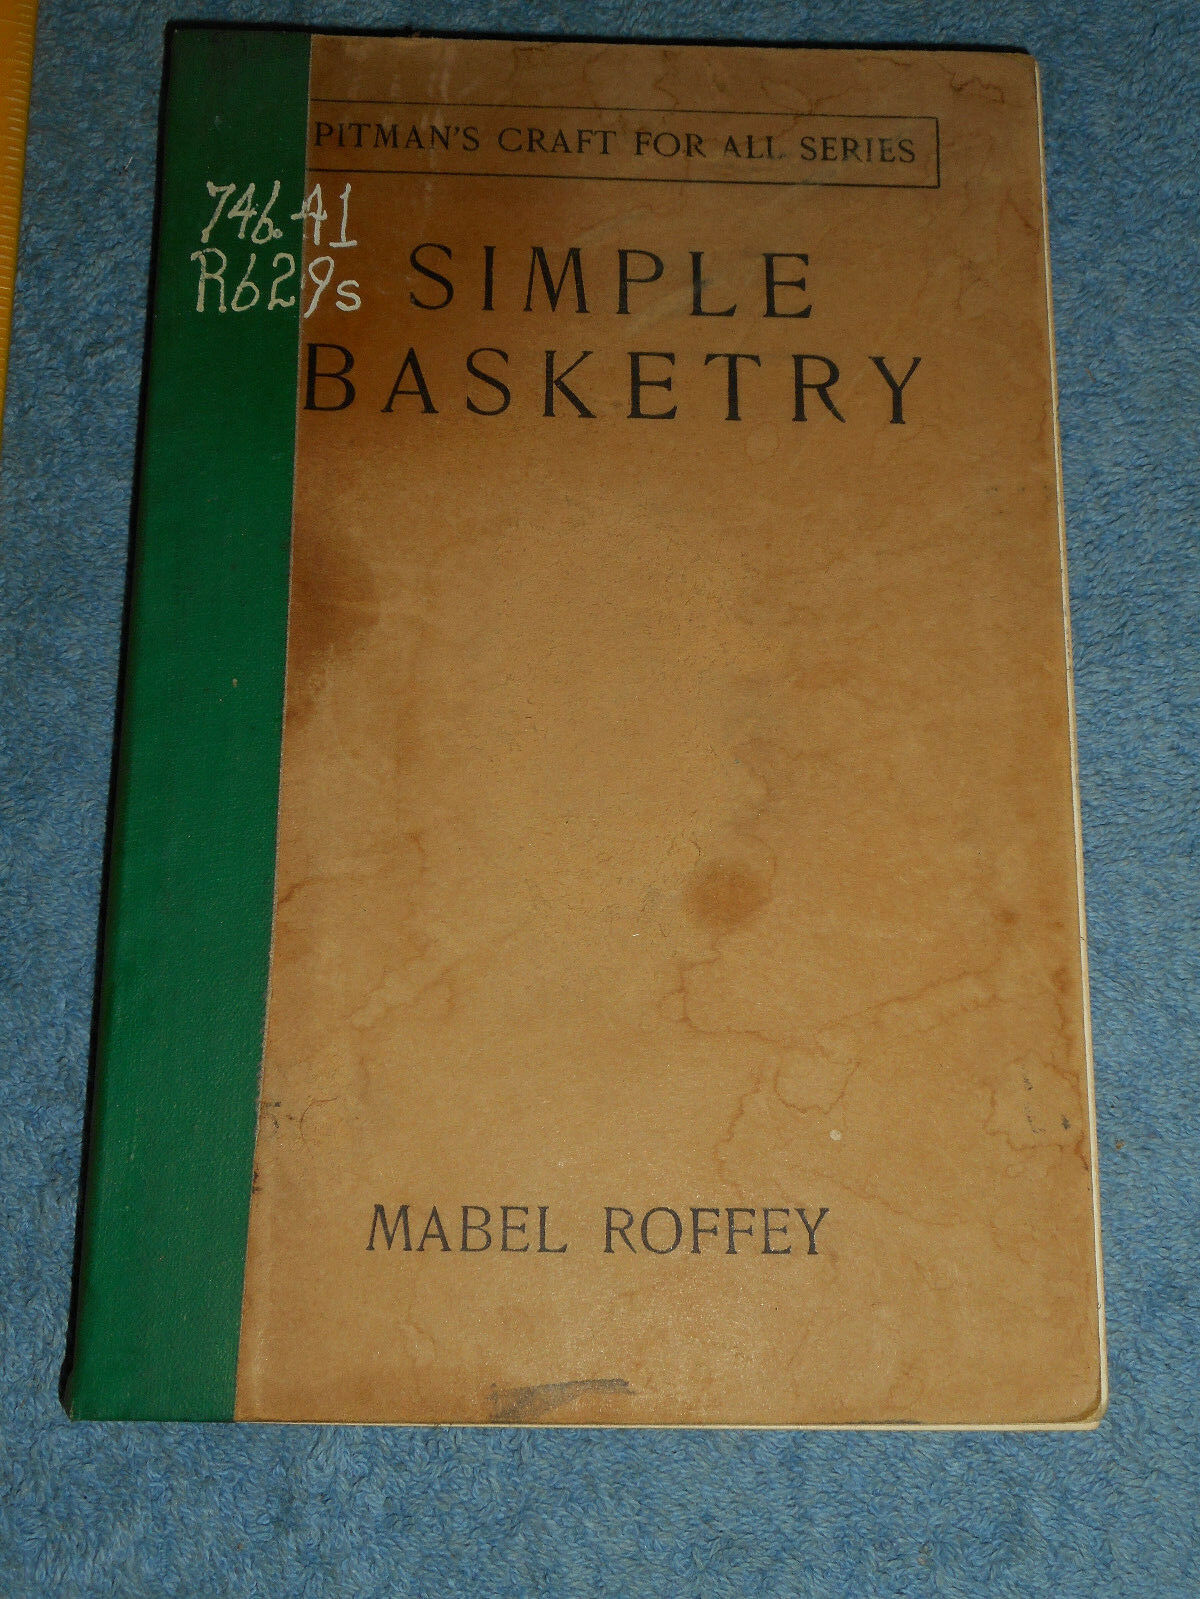 1934 Pitman's Craft For All Series Simple Basketry By Mabel Roffey Pittman Press